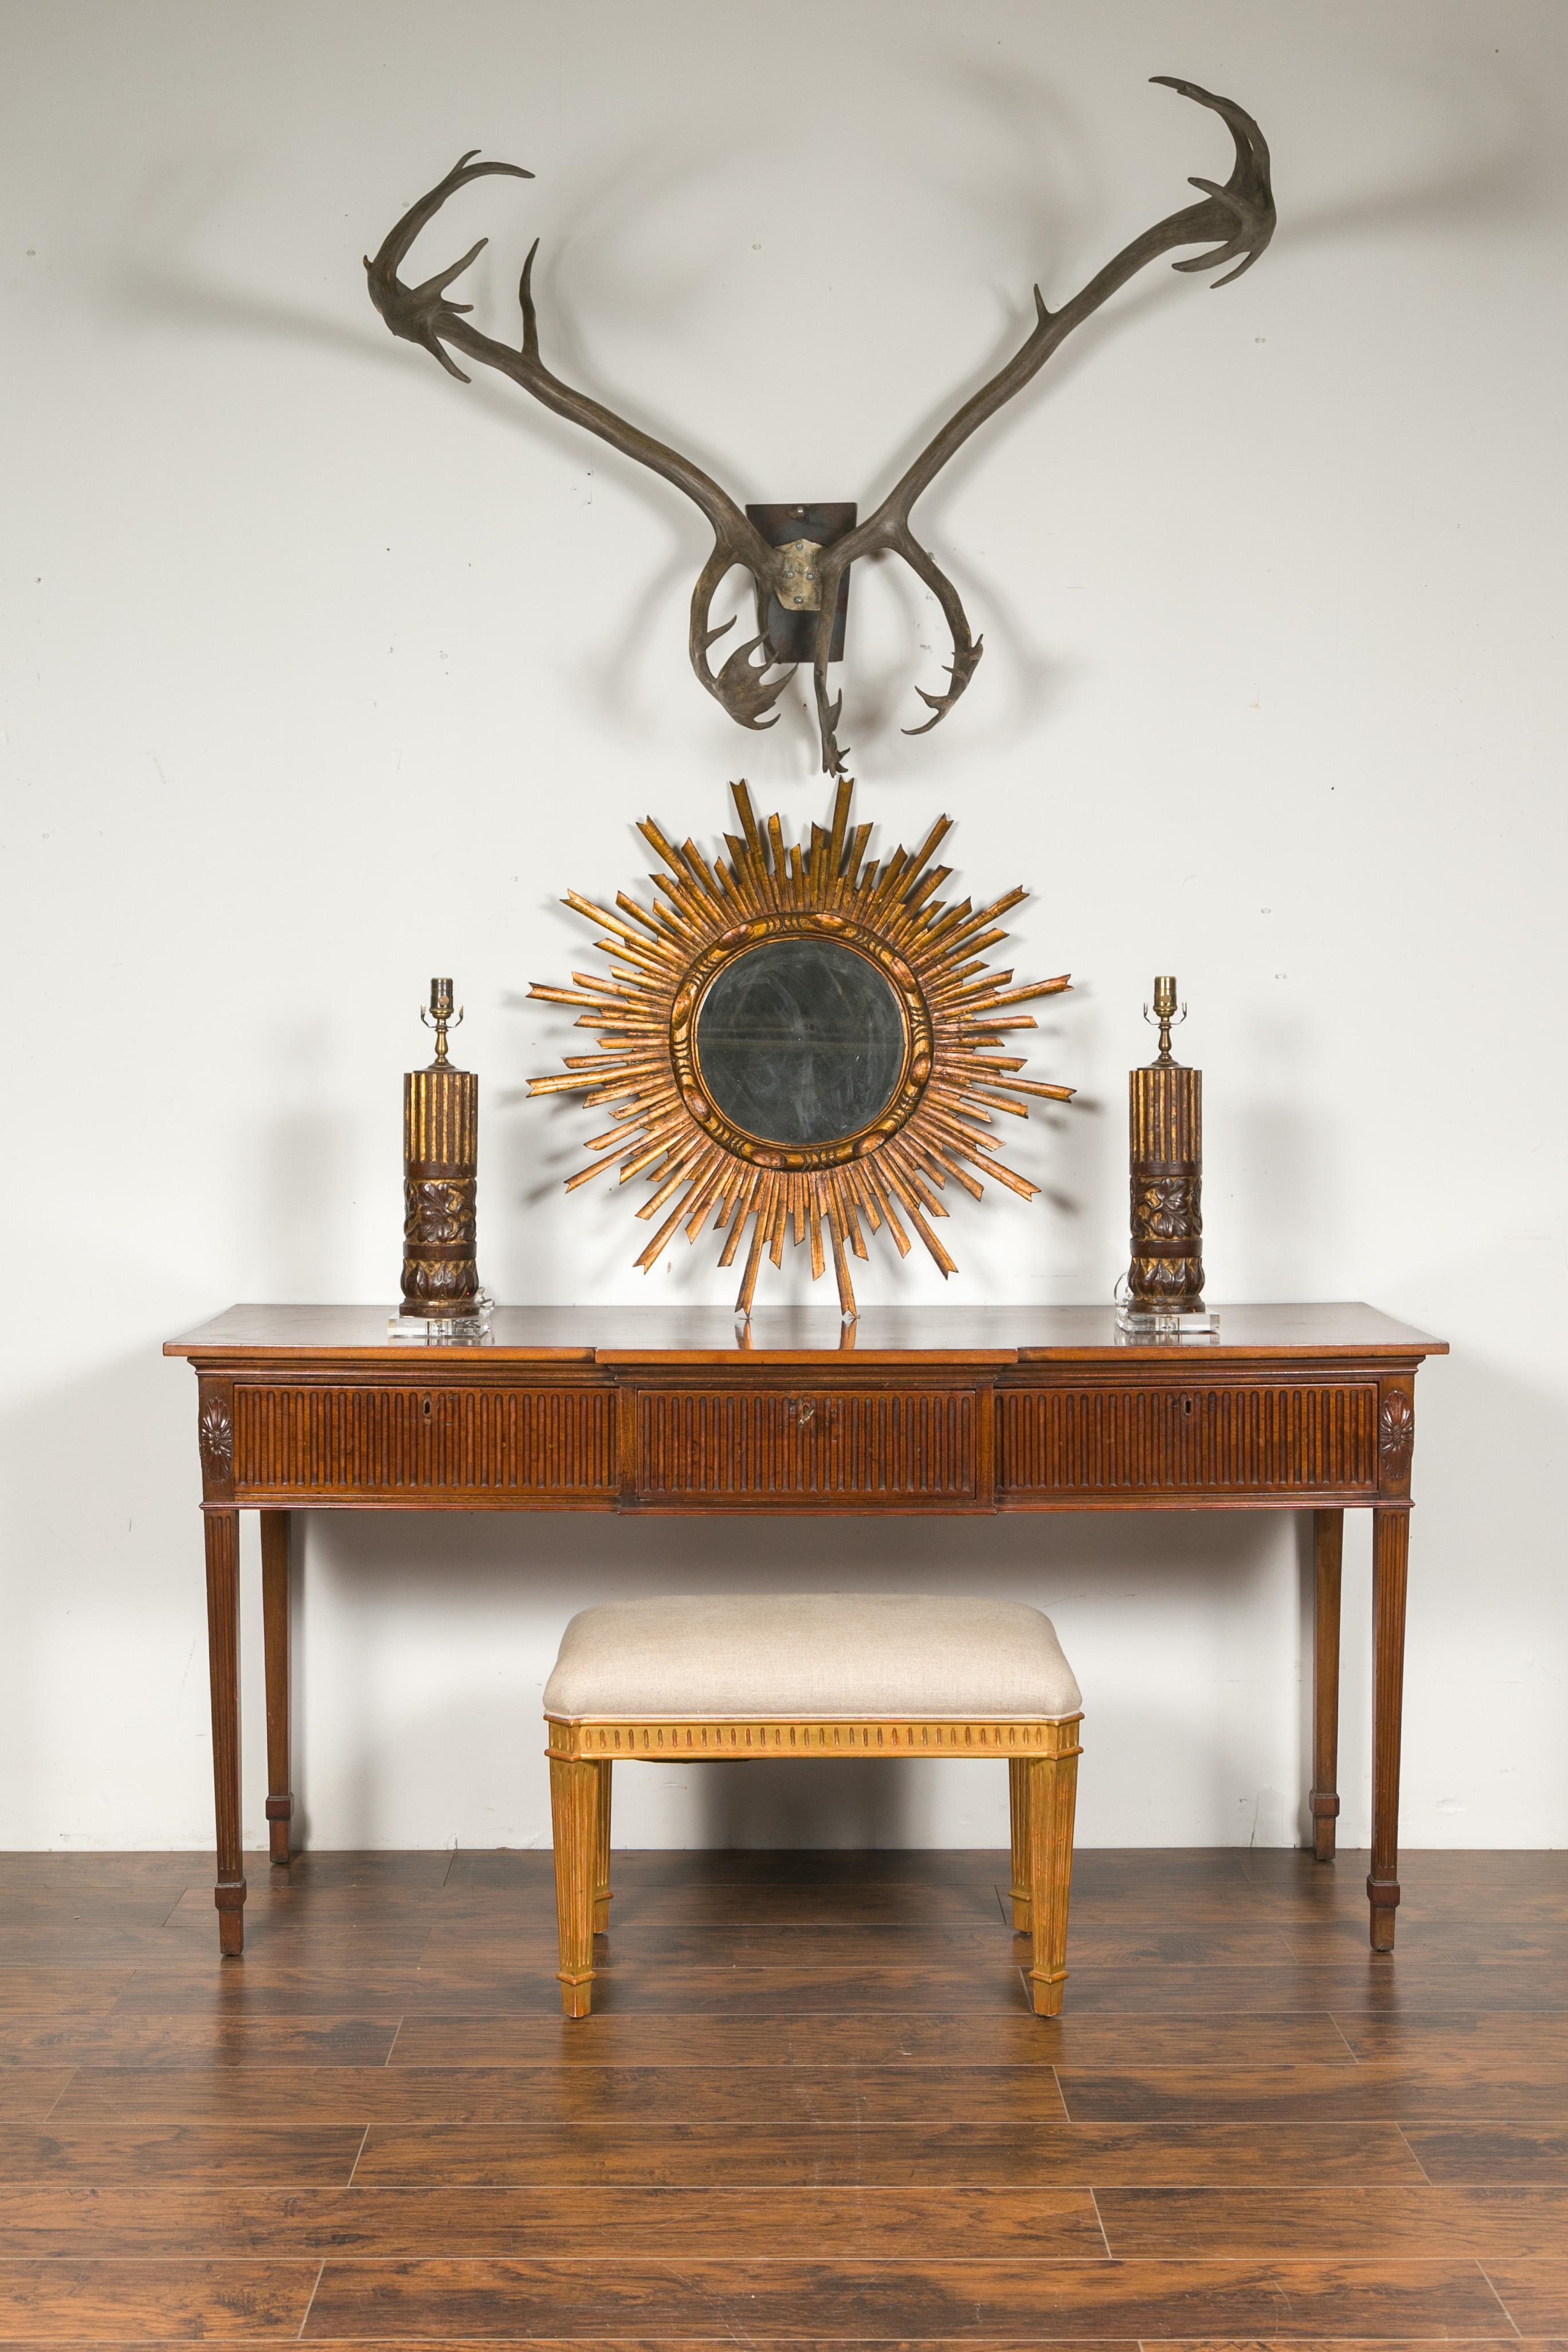 An English Georgian period mahogany breakfront sideboard from the early 19th century, with fluted motifs, tapered legs and three drawers. Born in England during the first quarter of the 19th century, this Georgian mahogany sideboard features a